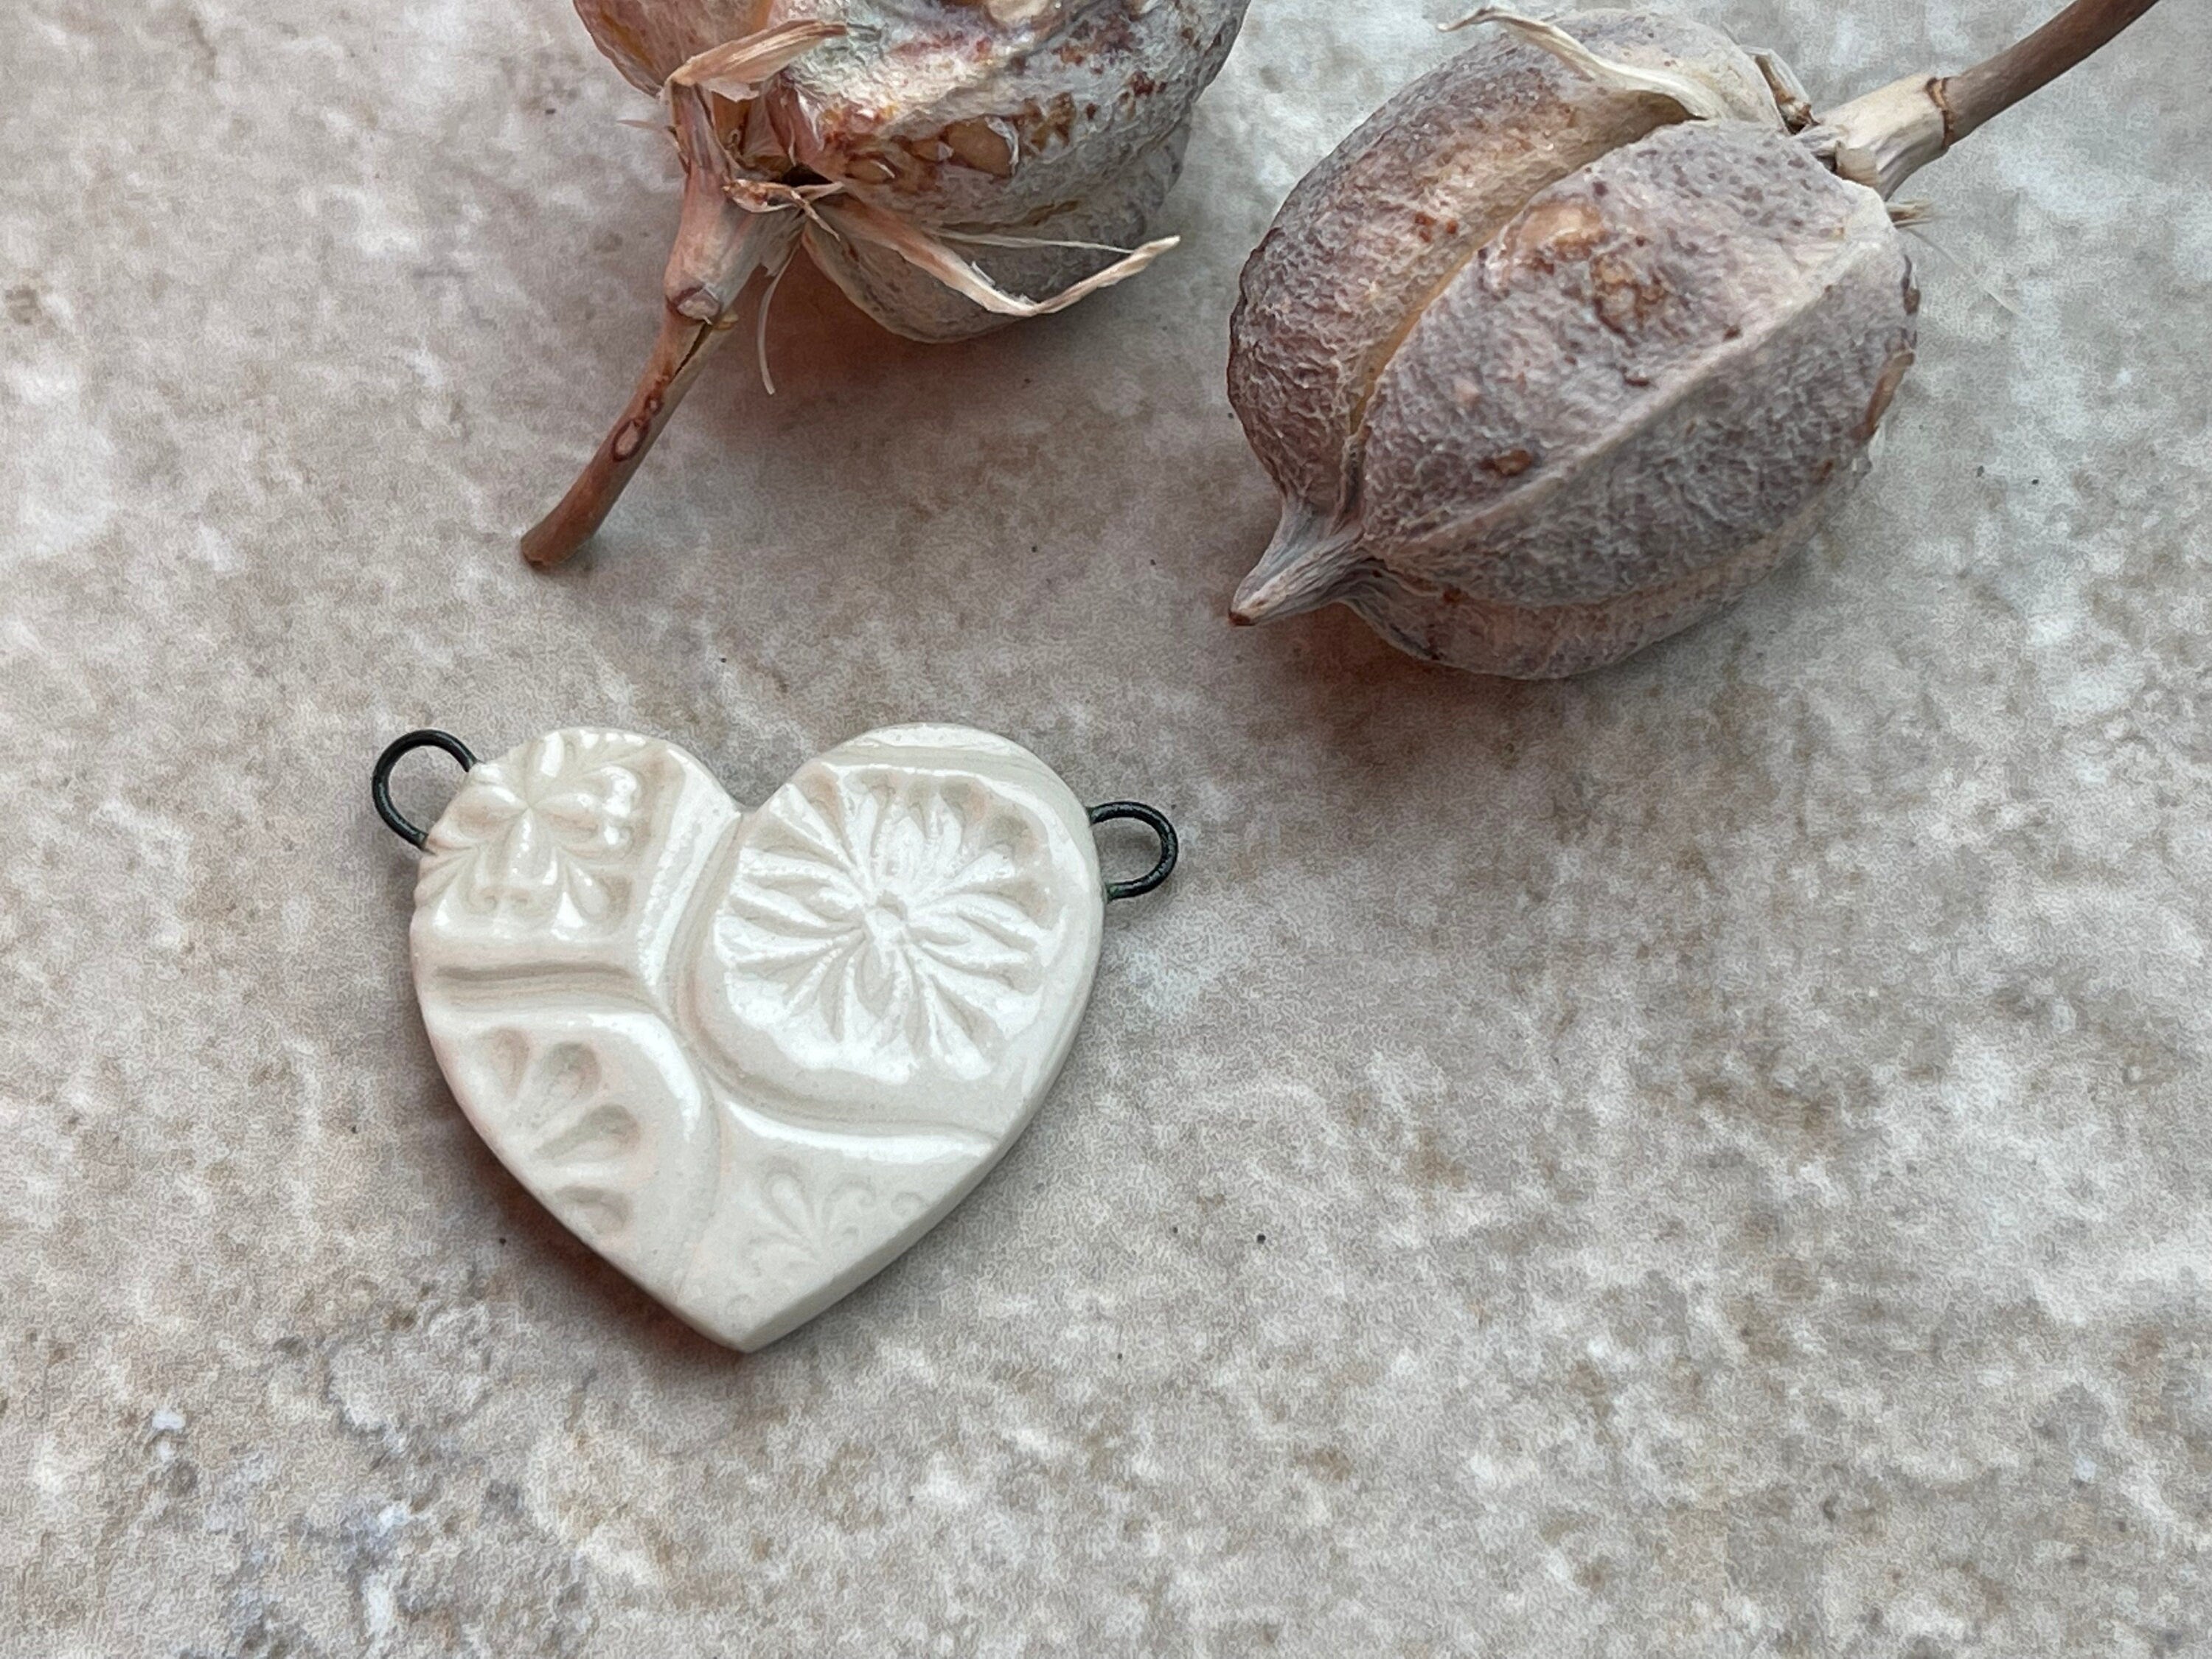 White Heart Pendant, White Talavera Pattern, Double Wire Heart Pendant, Jewelry Making Component, DIY Necklace